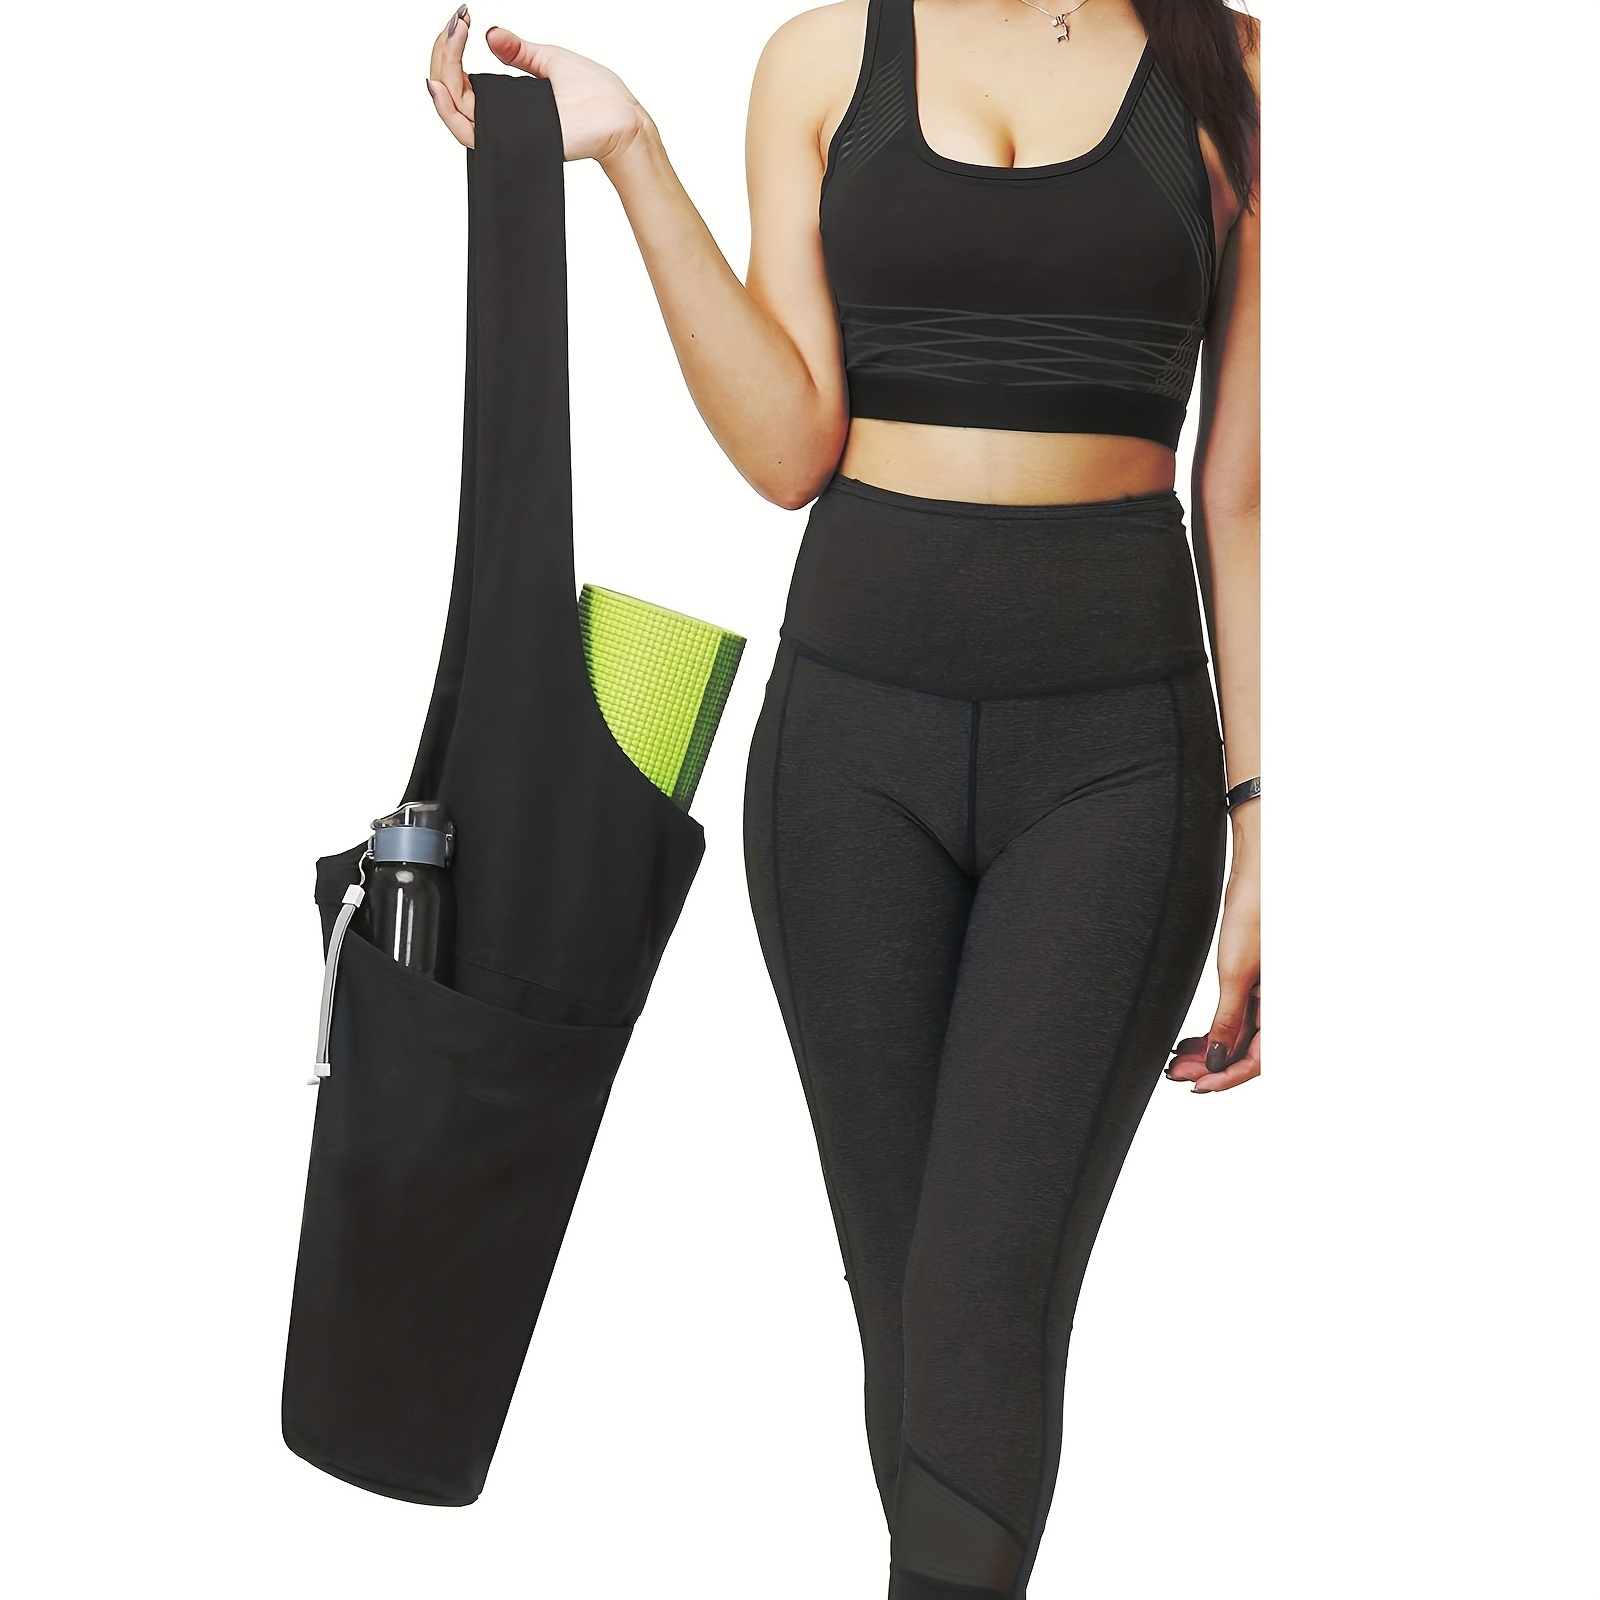  Yoga Mat Bag - Long Tote with Pockets - Holds More